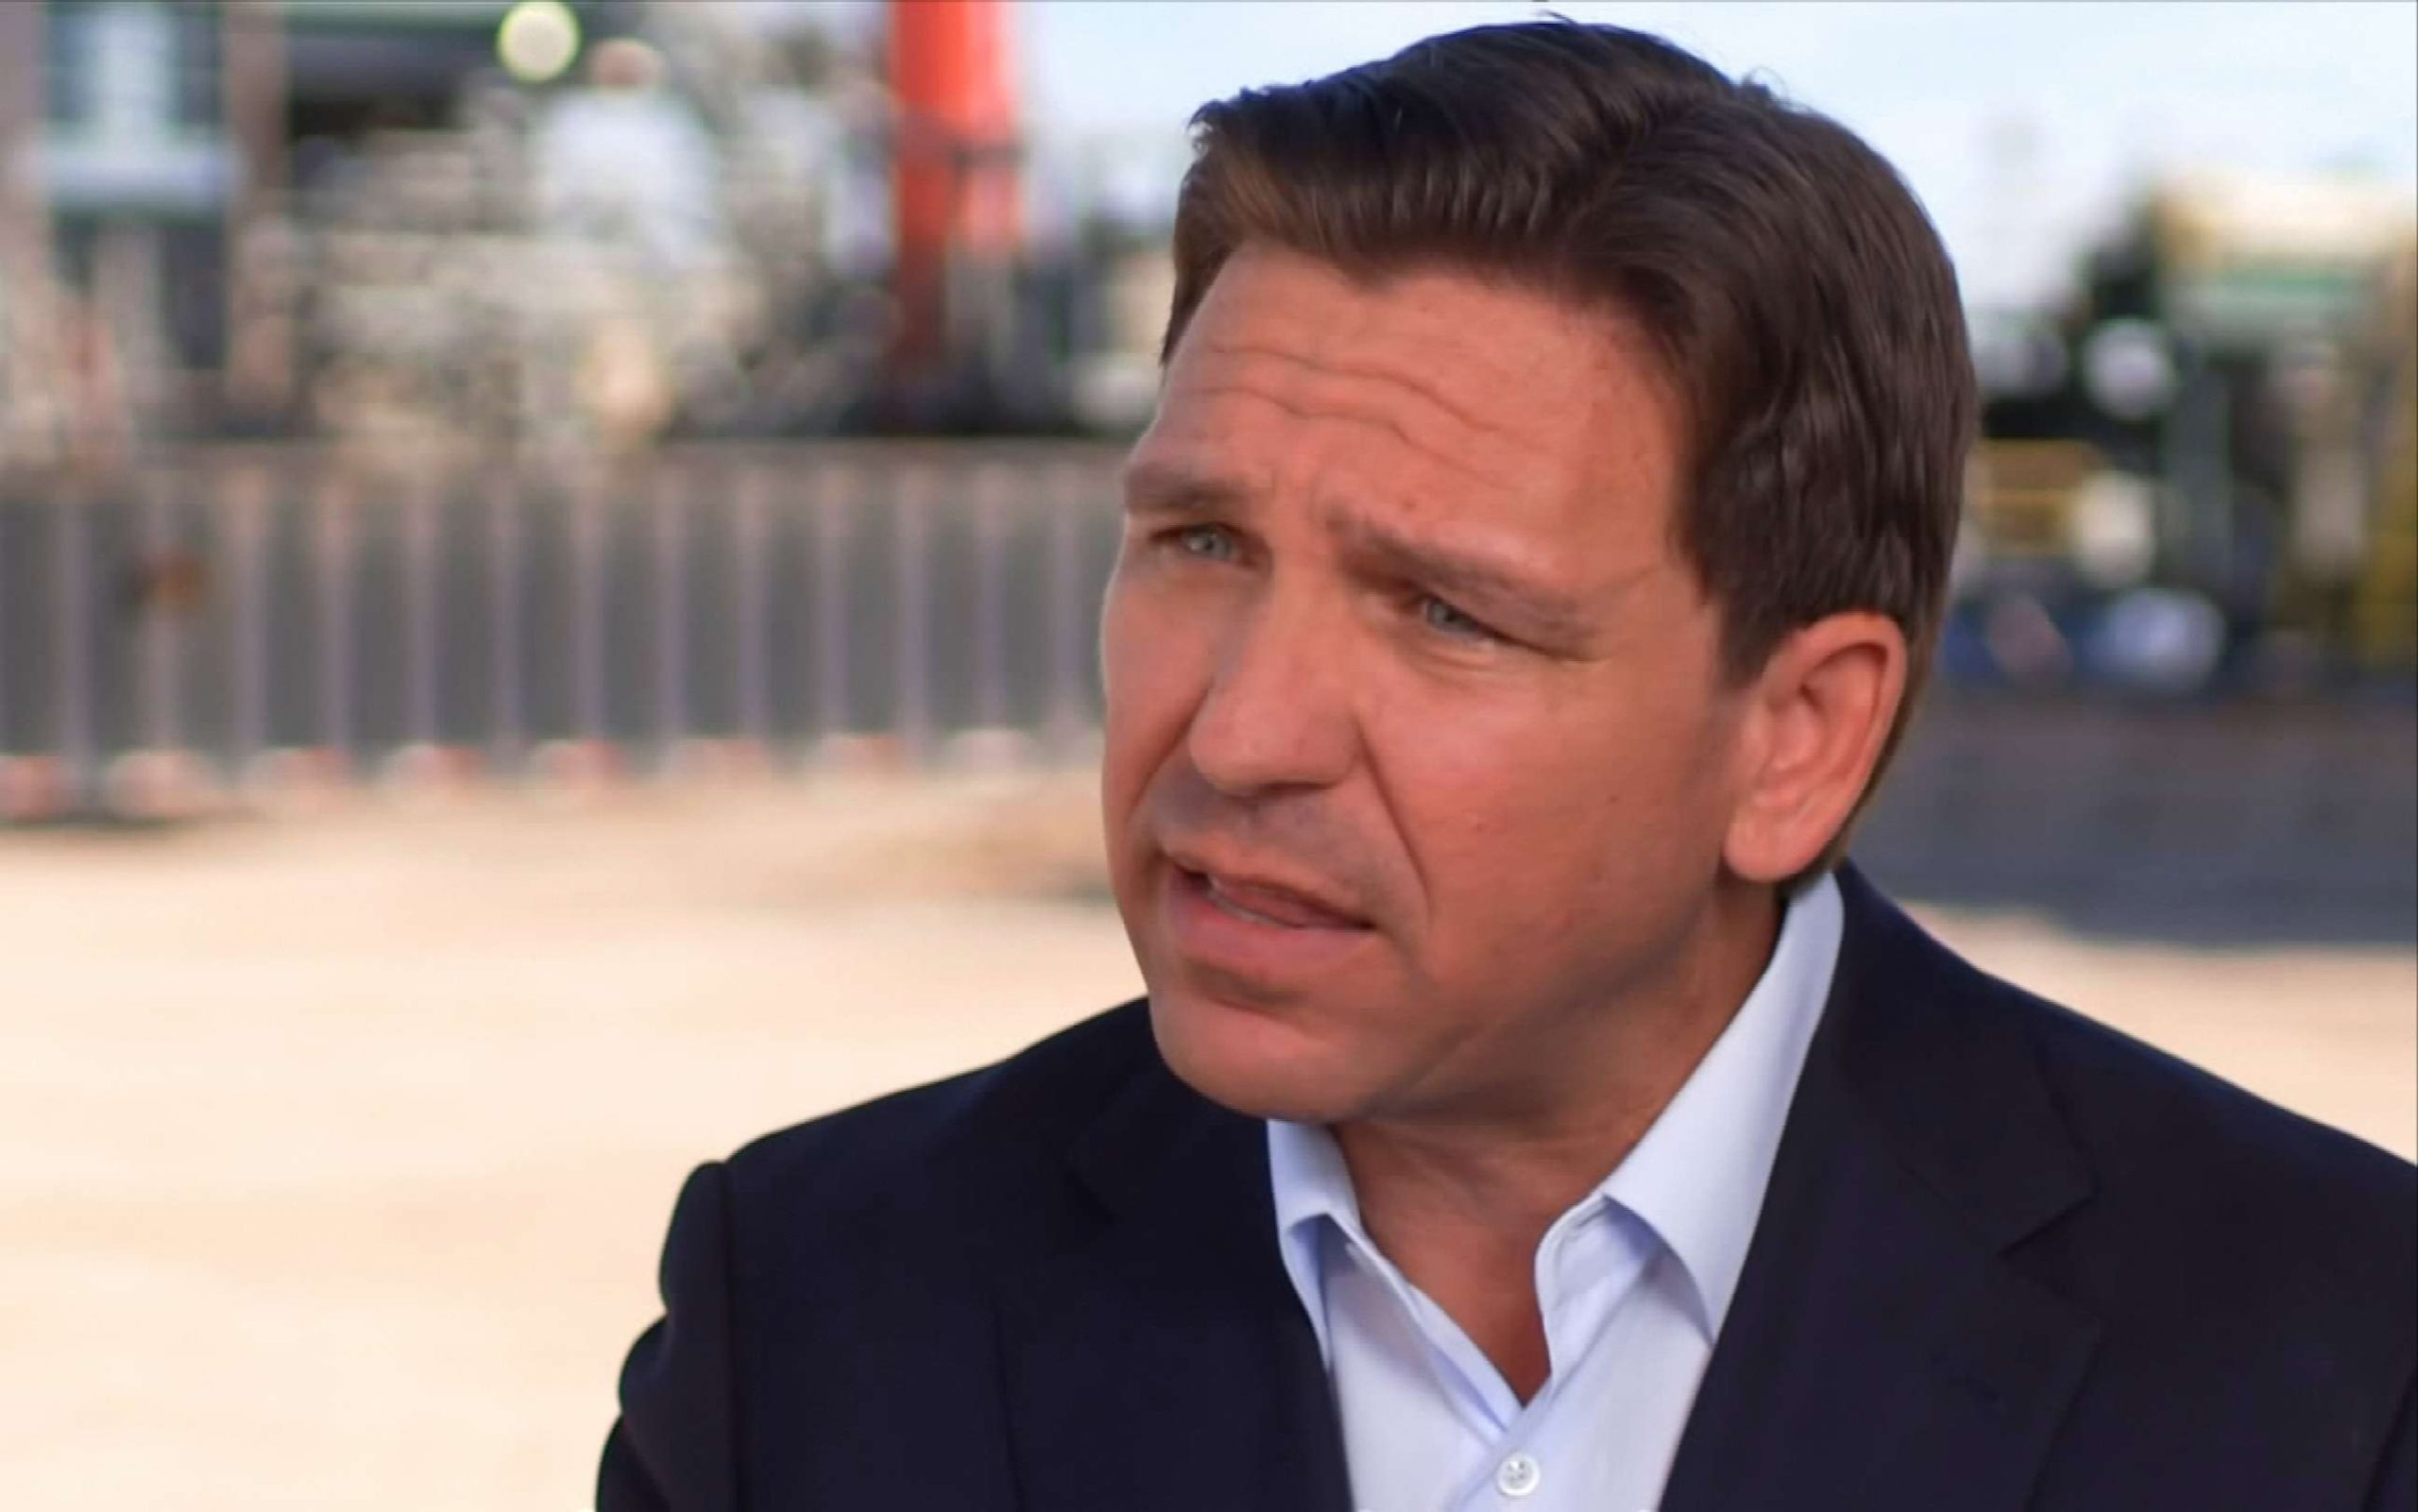 DeSantis Criticizes Trump's Abortion Comment as a 'Mistake': Highlighting the Evolution of His Candidacy since 2016